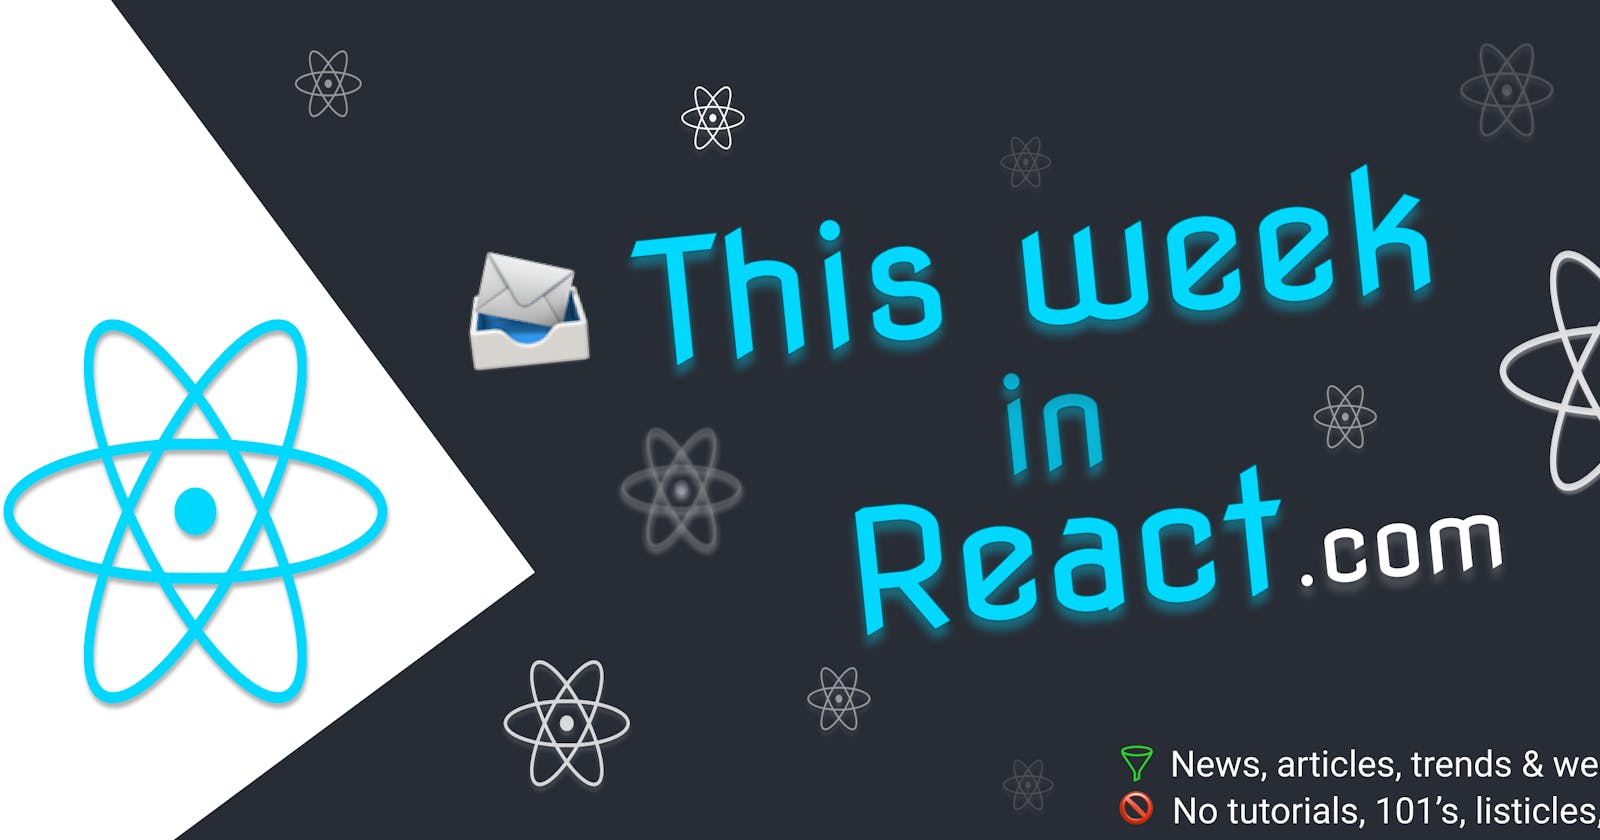 This Week In React #165: StyleX, CSS Hooks, PandaCSS, Tailwind, Redux, Astro, Next.js, Remix, Storybook, React-Native 0.73, State of React-Native...